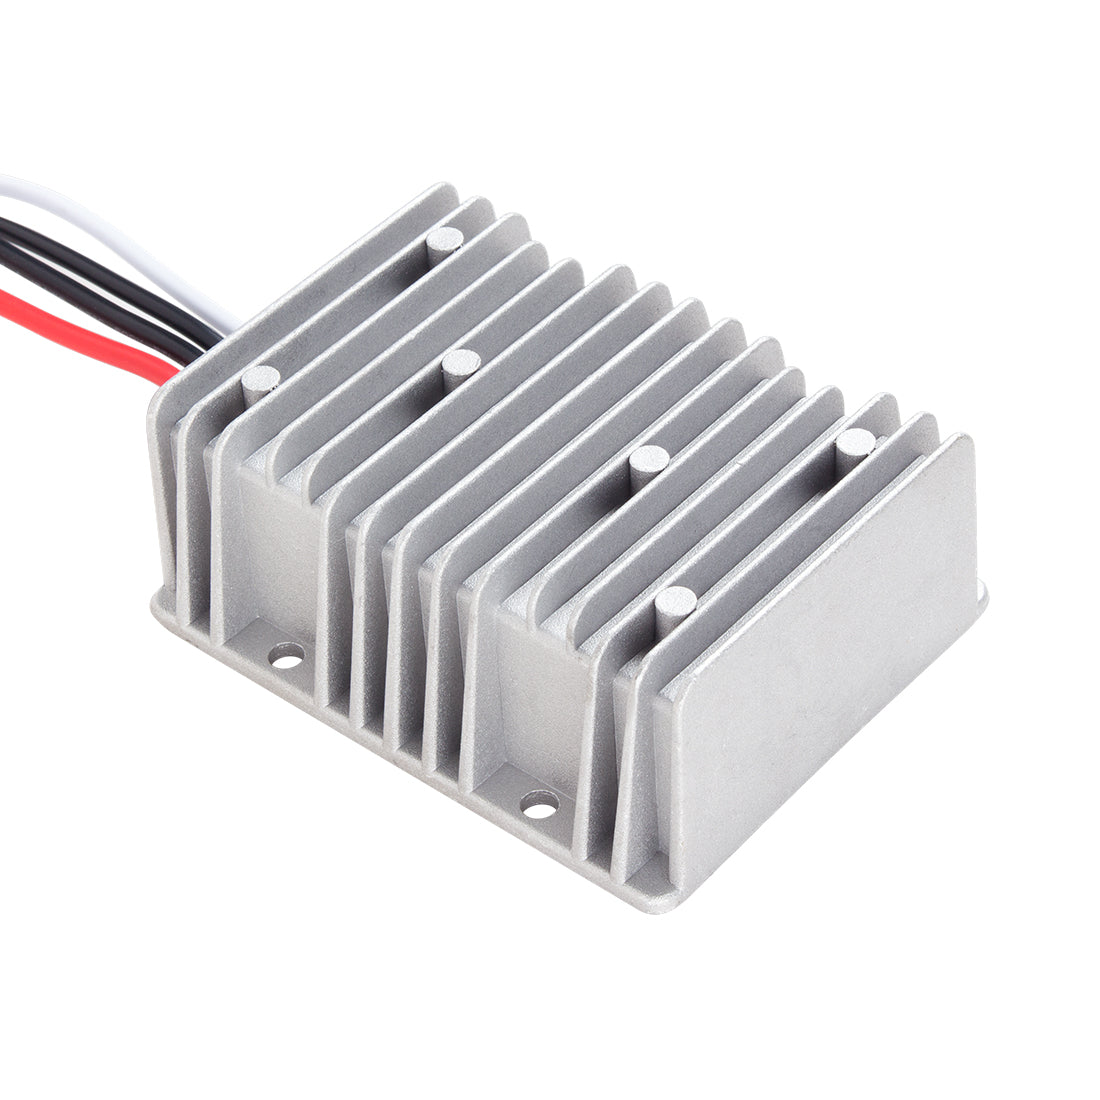 uxcell uxcell Voltage Converter Regulator DC/DC DC 12V Step-Up to DC 19V 20A 380W Power Boost Transformer Waterproof